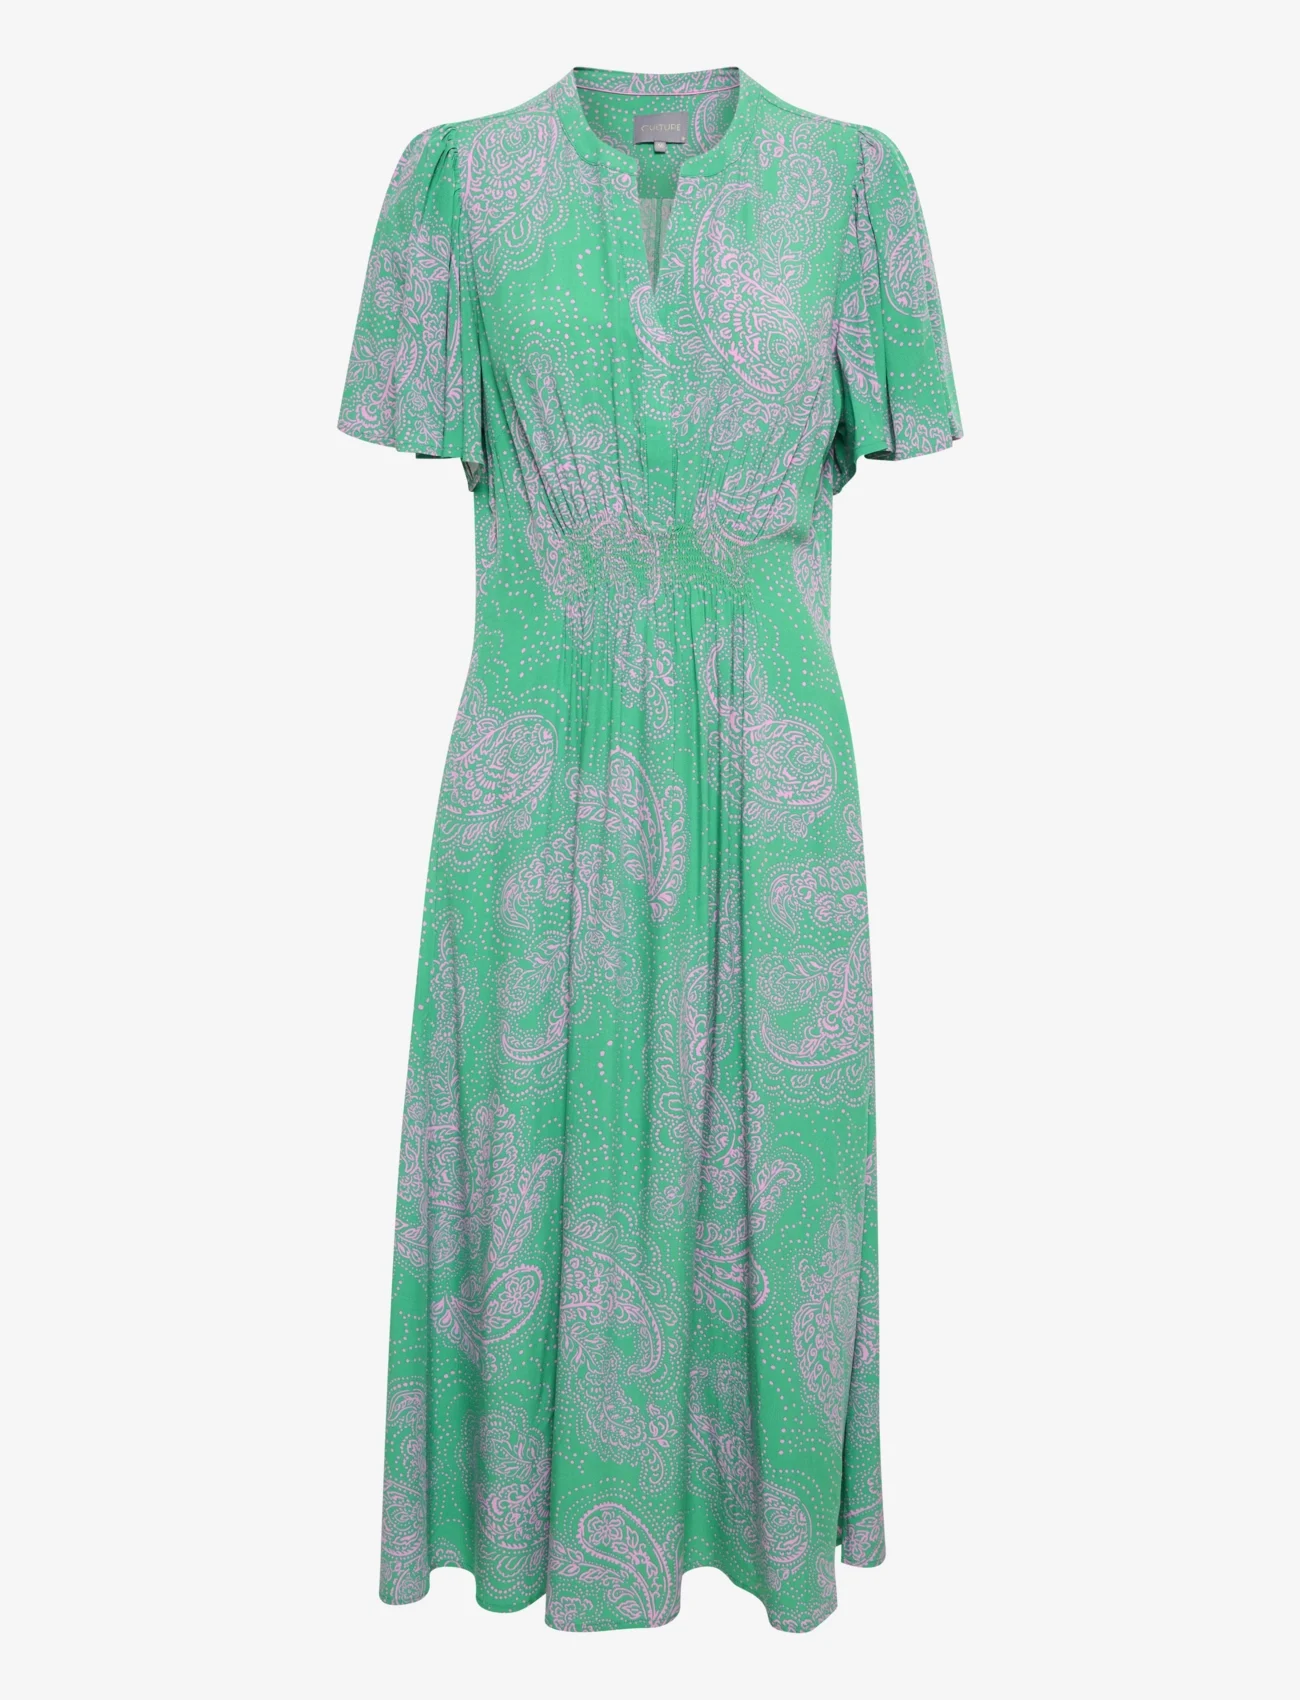 Culture - CUpolly Long Dress - sommerkleider - green/pink paisley - 0